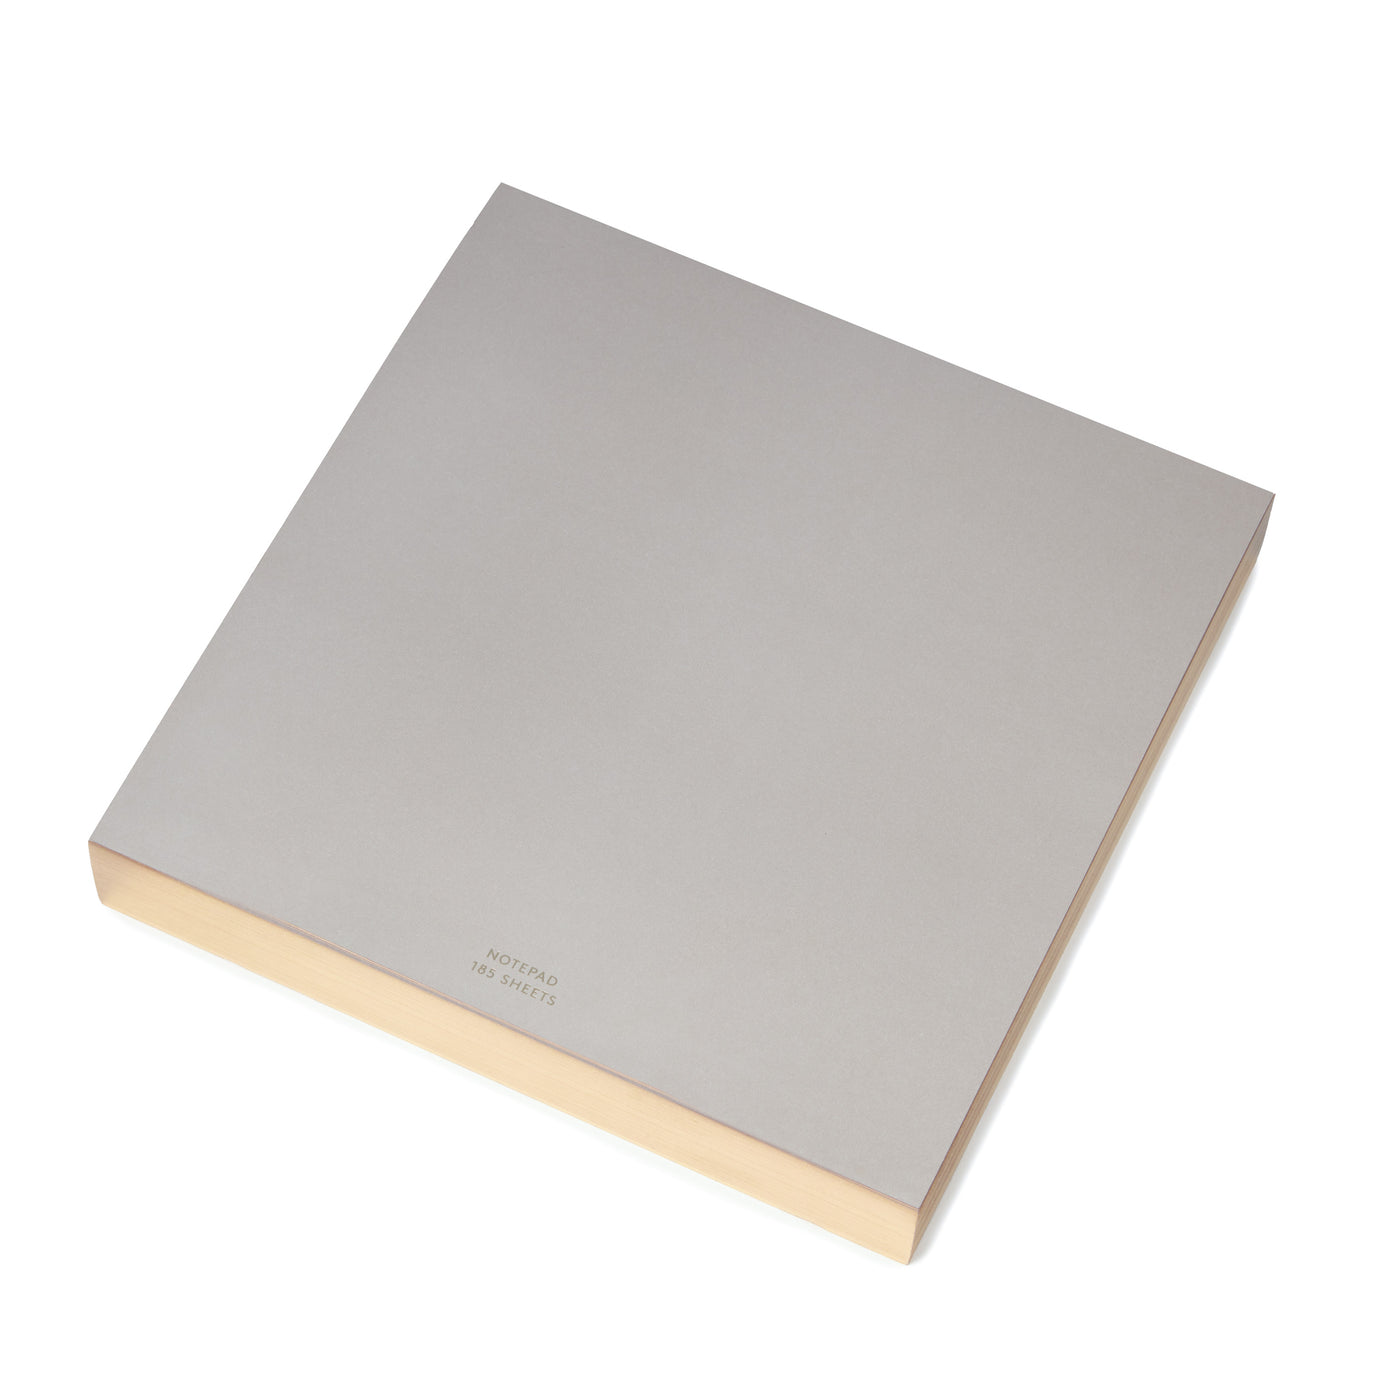 Large Square Color Pad in Greige